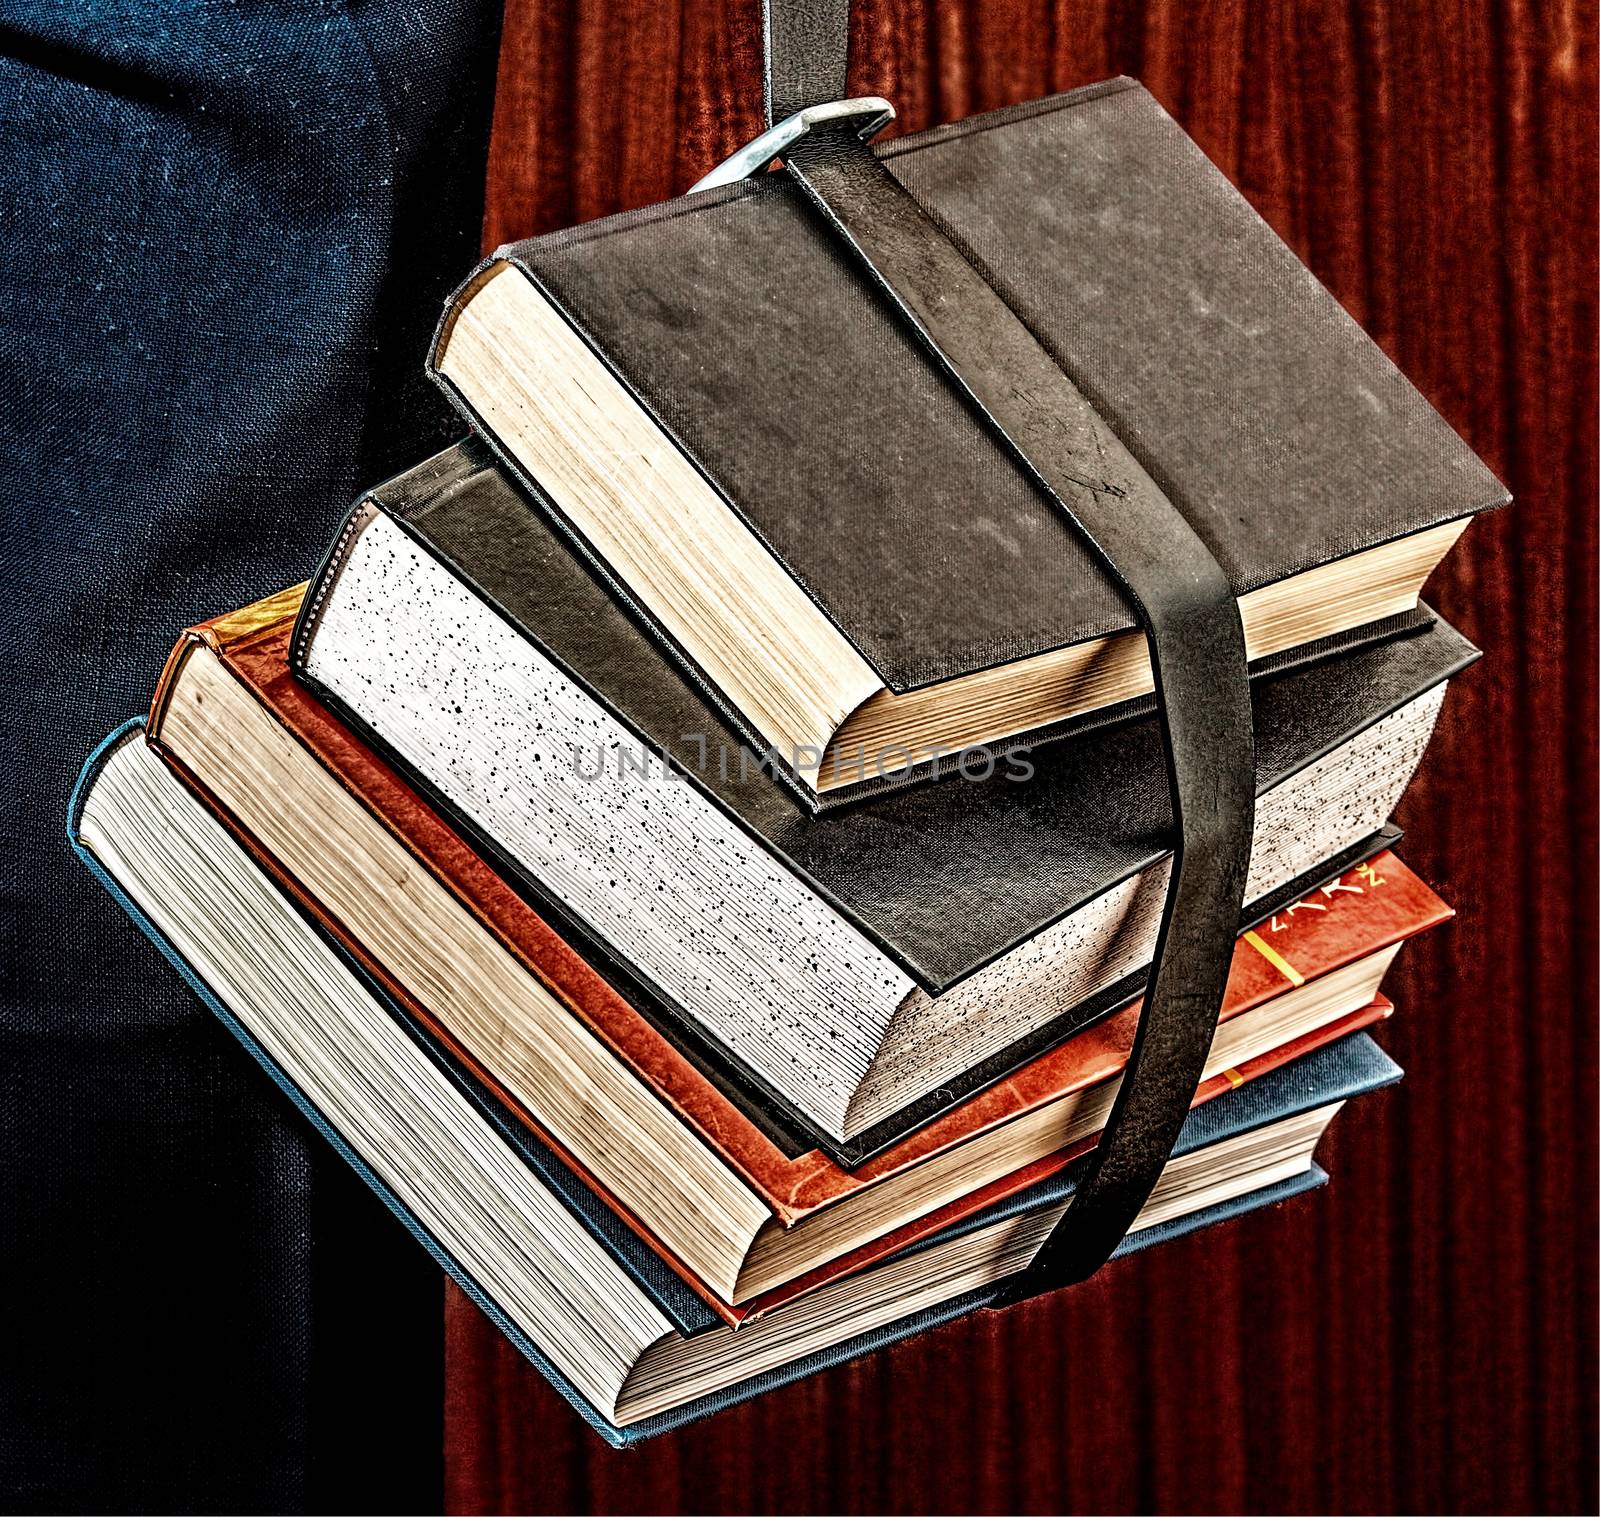 Five books hanging on a belt by JRTBurr